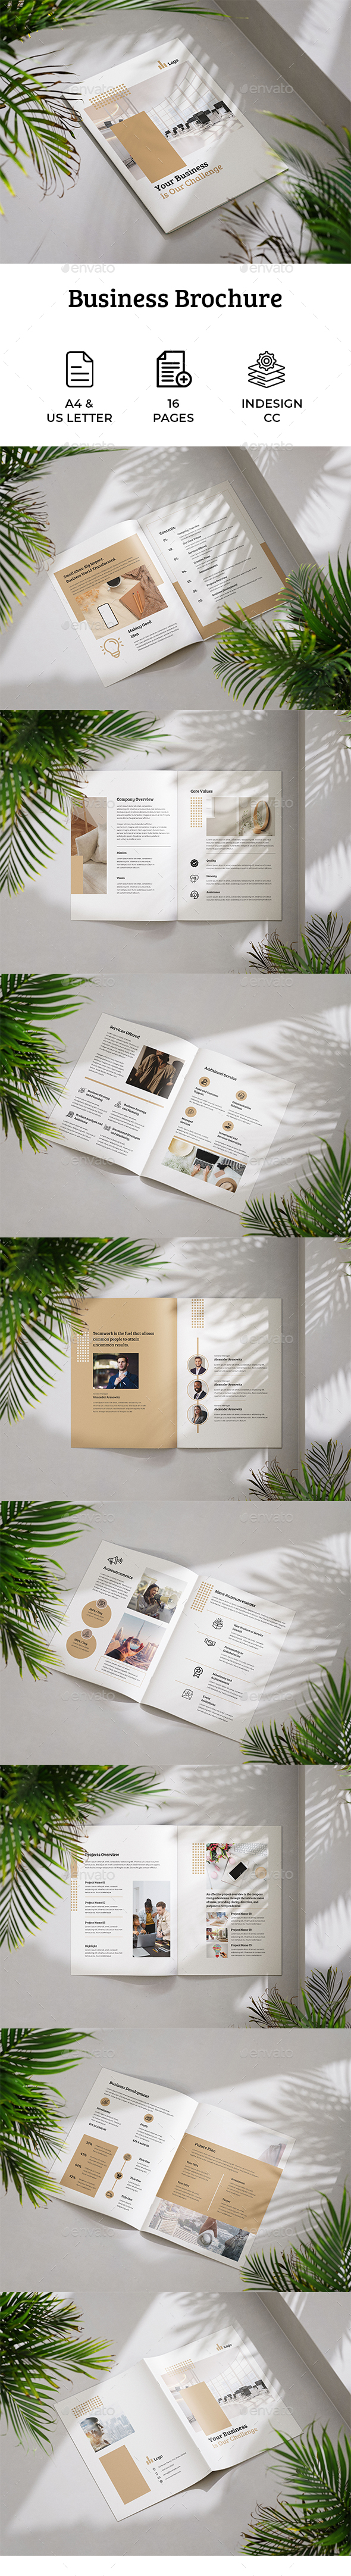 Business Brochure Template | Indesign